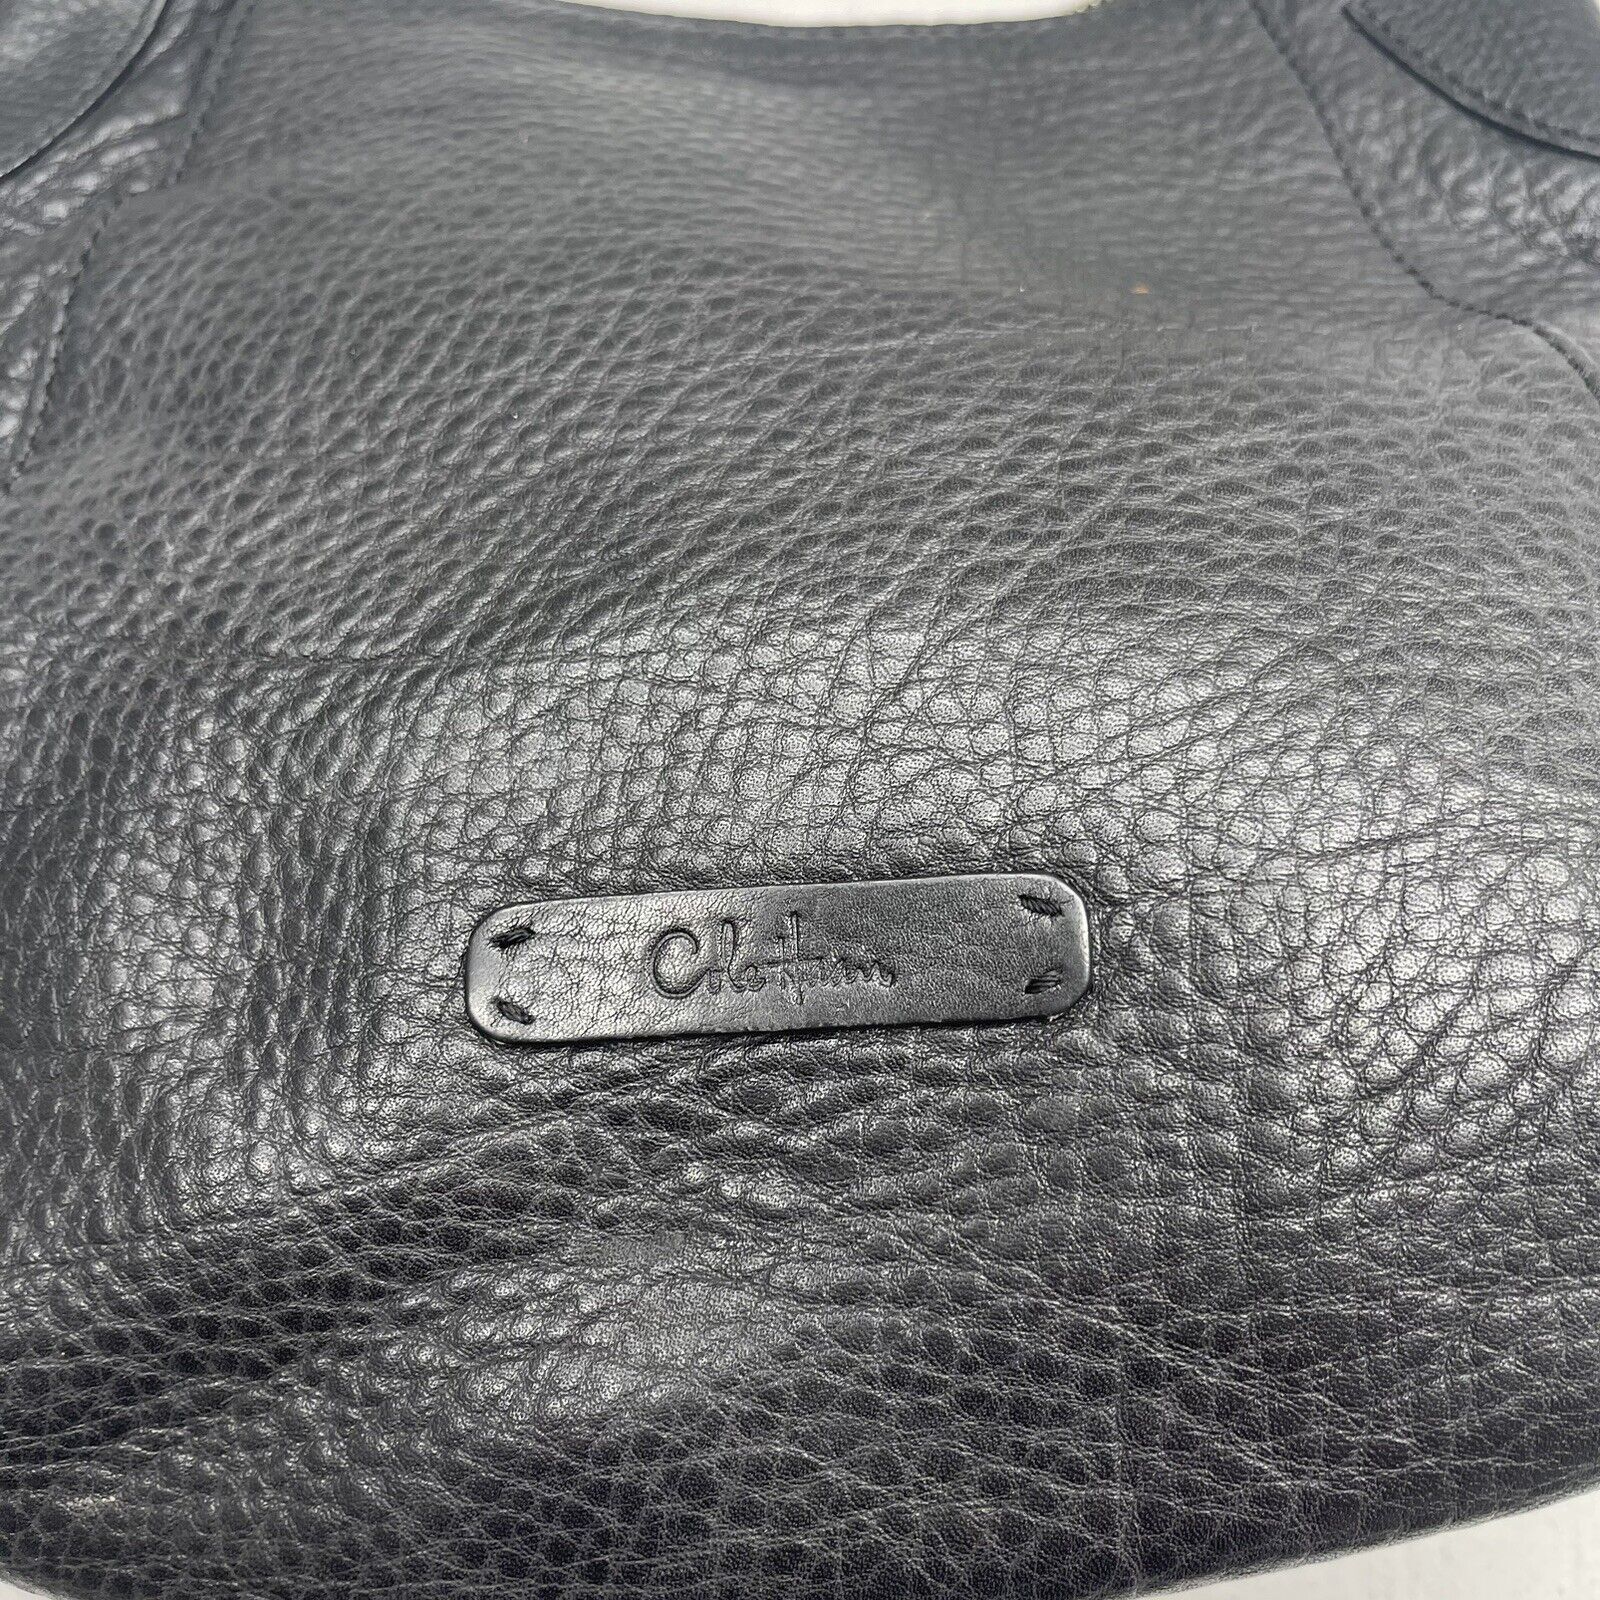 Sale! Cole Haan Tote Crossbody | Black leather crossbody bag, Cole haan  purses, Camera bag purse